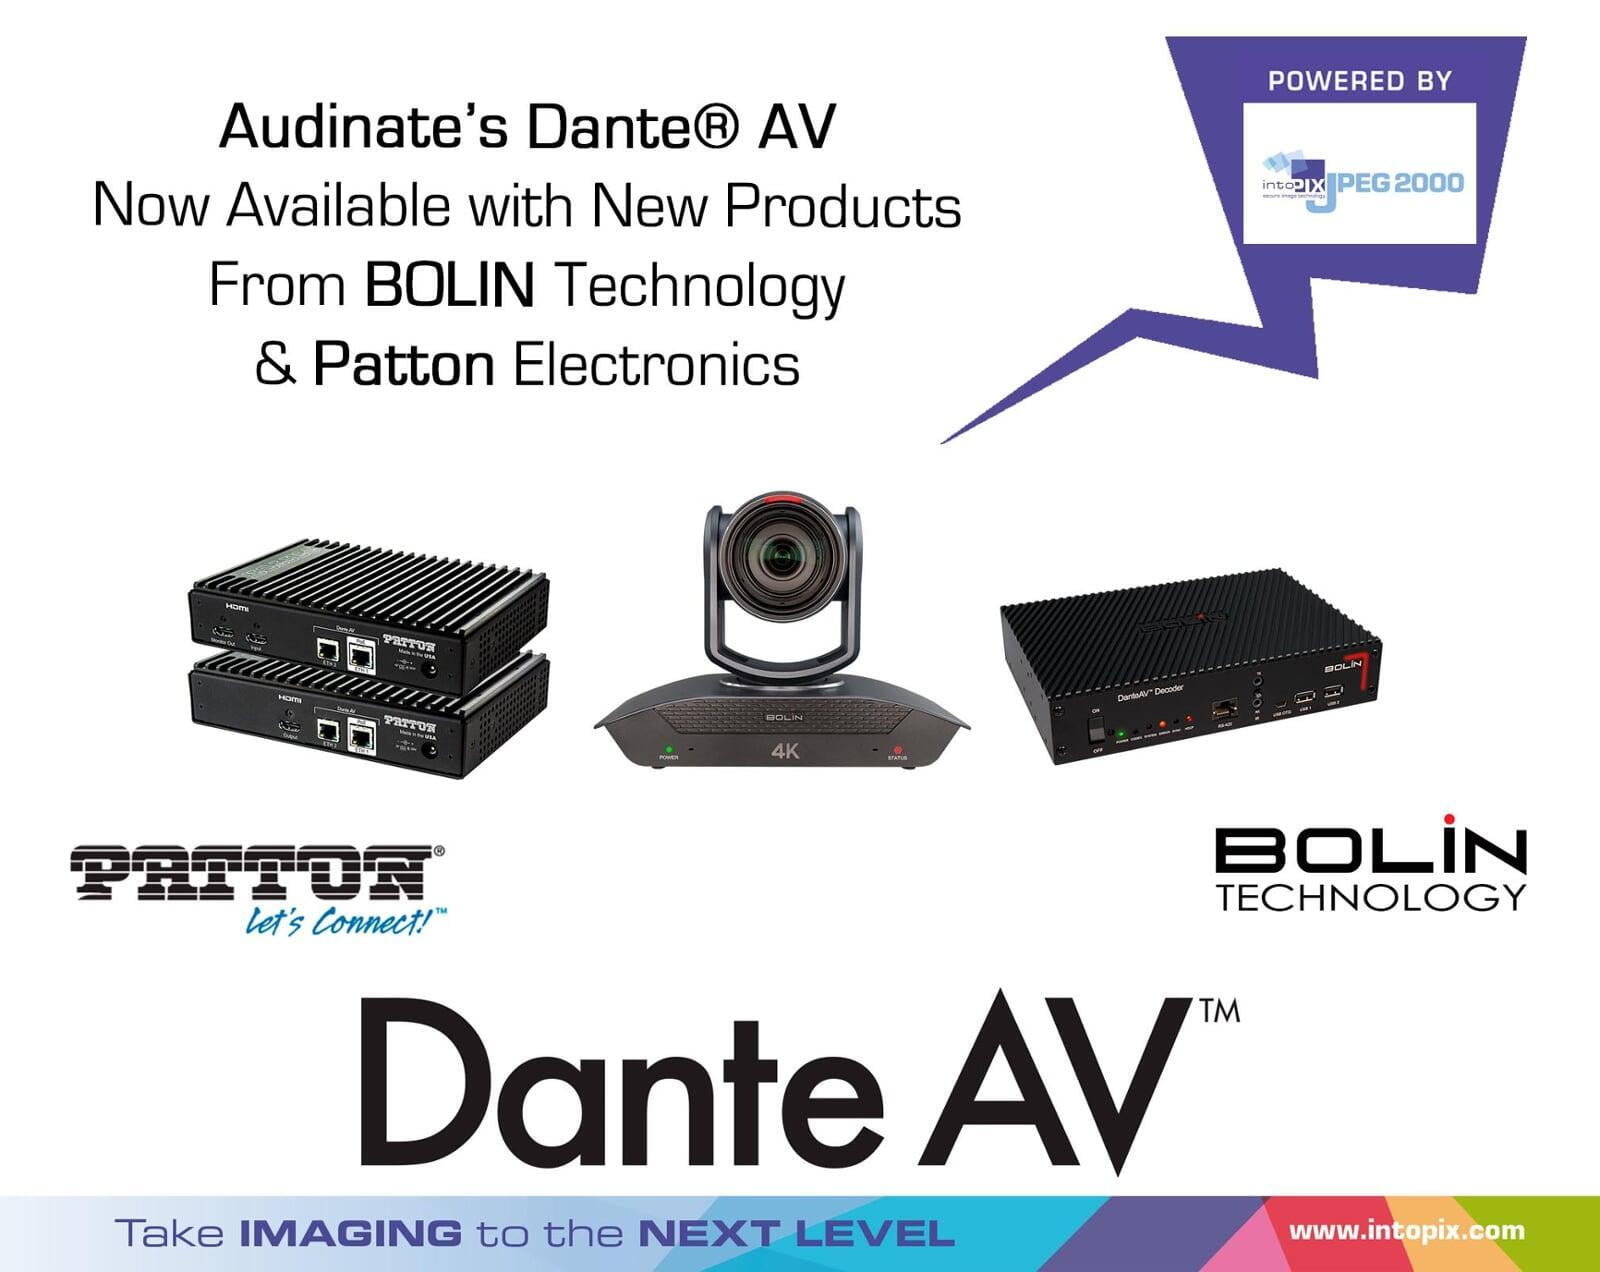 New Dante® AV Products from BOLIN Technology and Patton Electronics Now Available